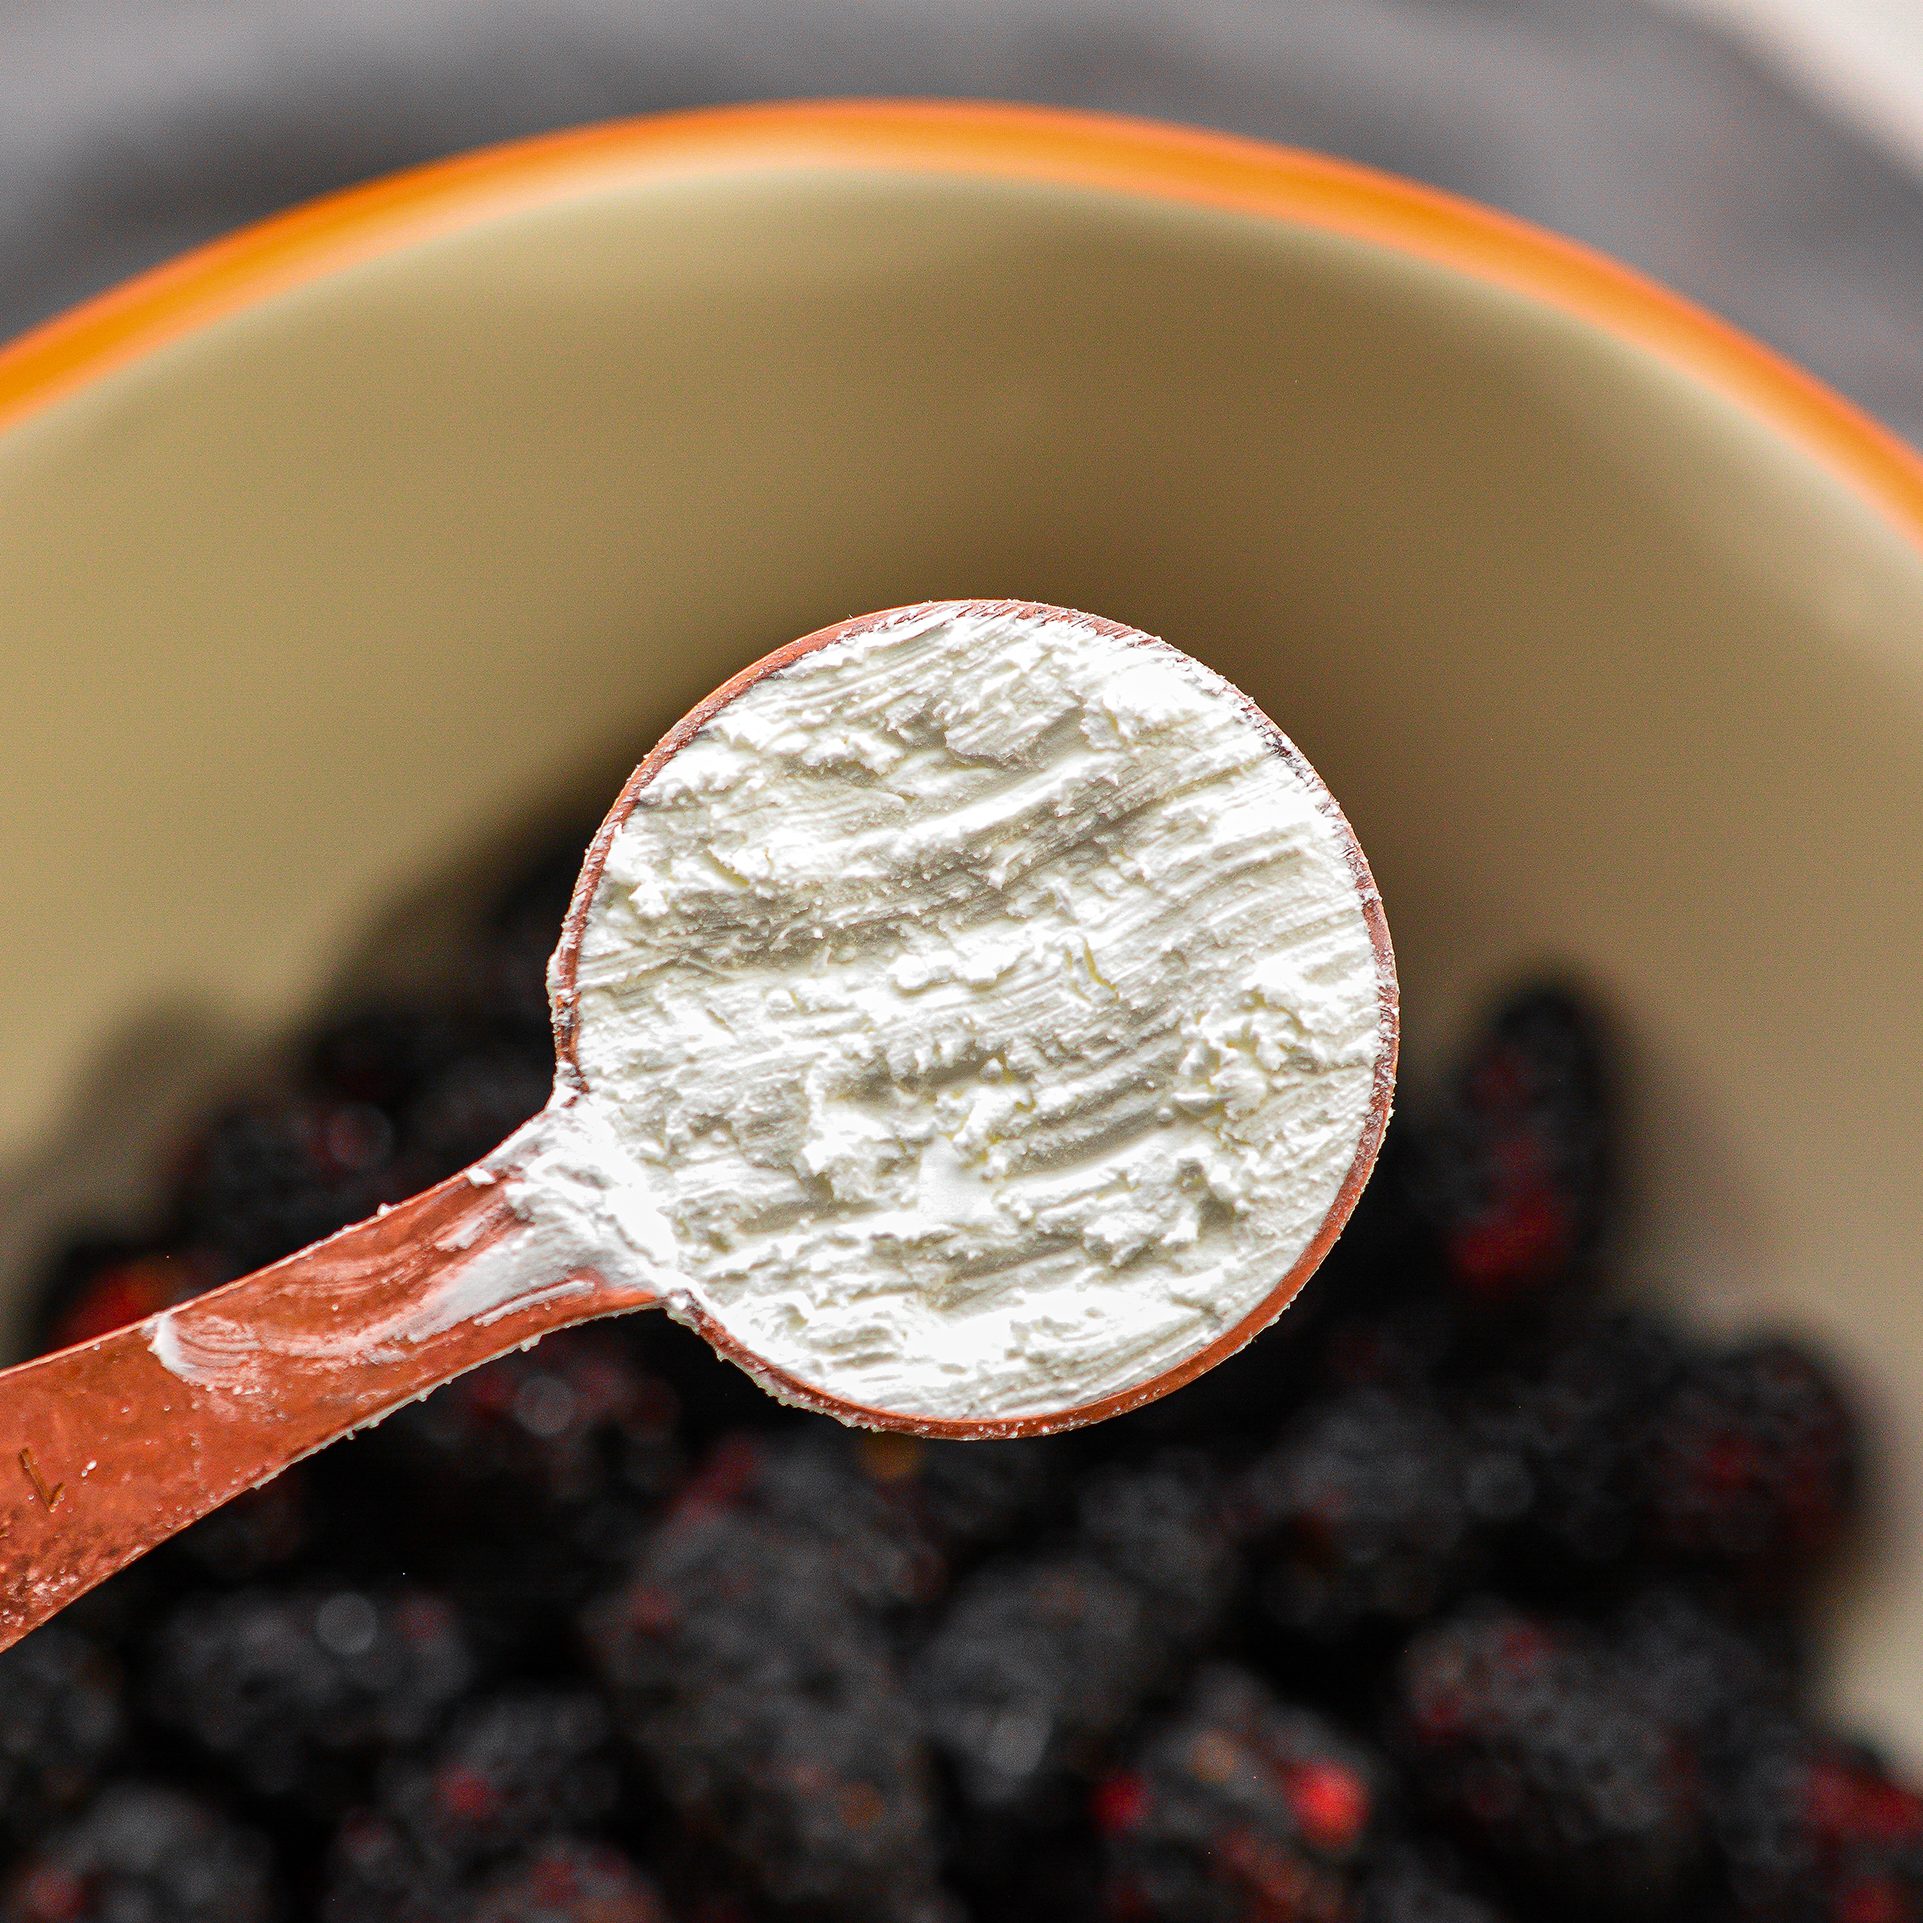 Add the berries, cornstarch, and ½ cup sugar to a mixing bowl and toss to coat. Drizzle the ¼ cup of melted butter over the berries and stir to combine.